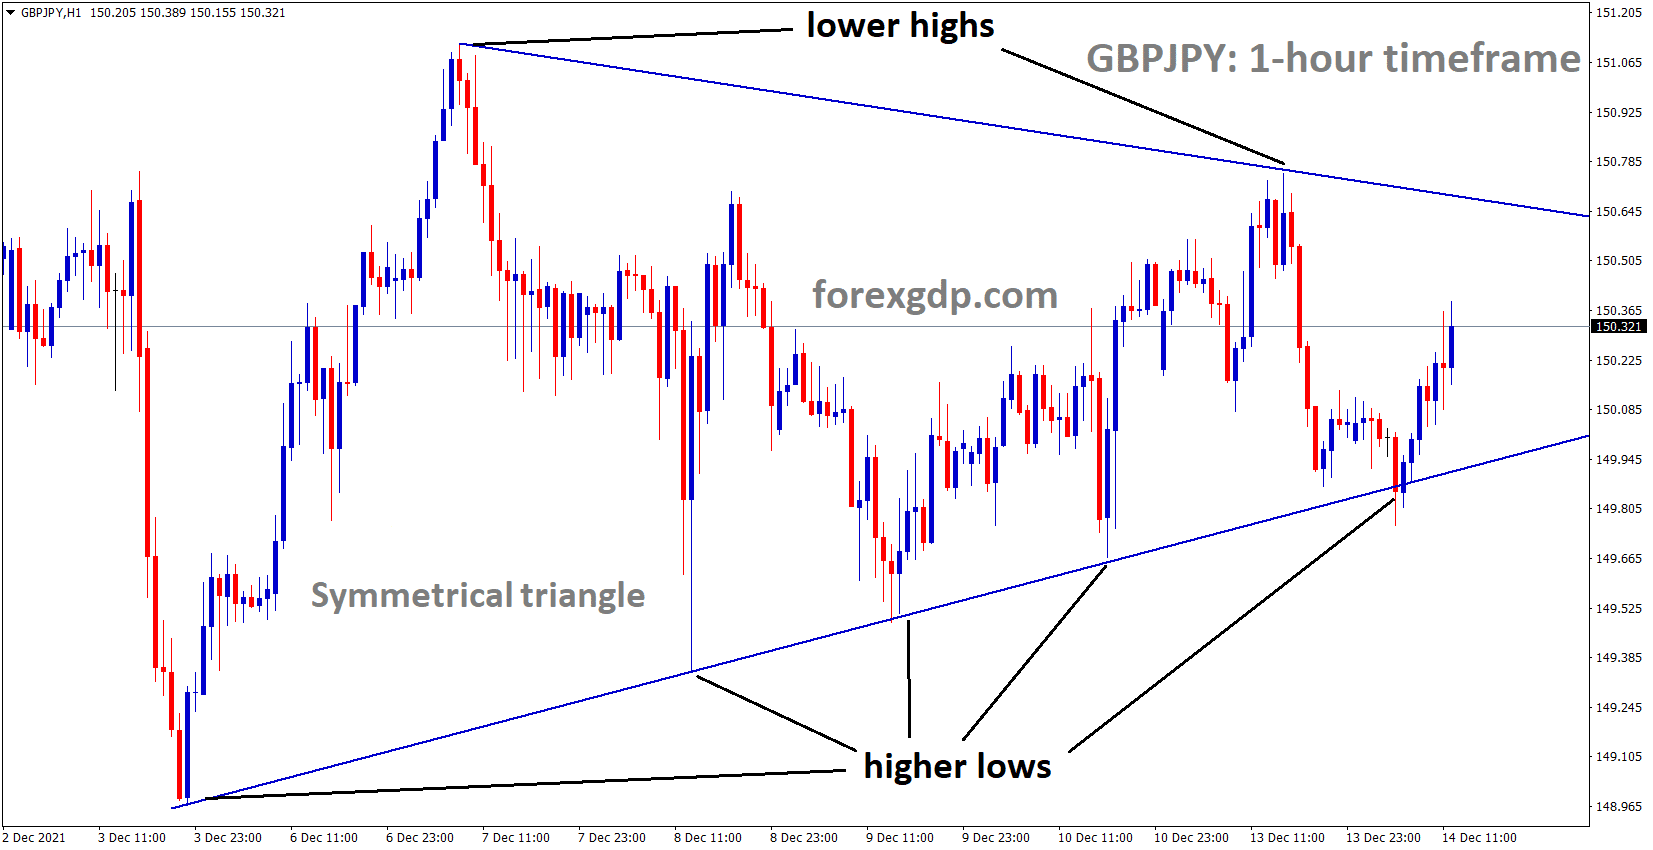 GBPJPY is moving in the Symmetrical triangle and market rebounding from the bottom area of the Symmetrical triangle pattern